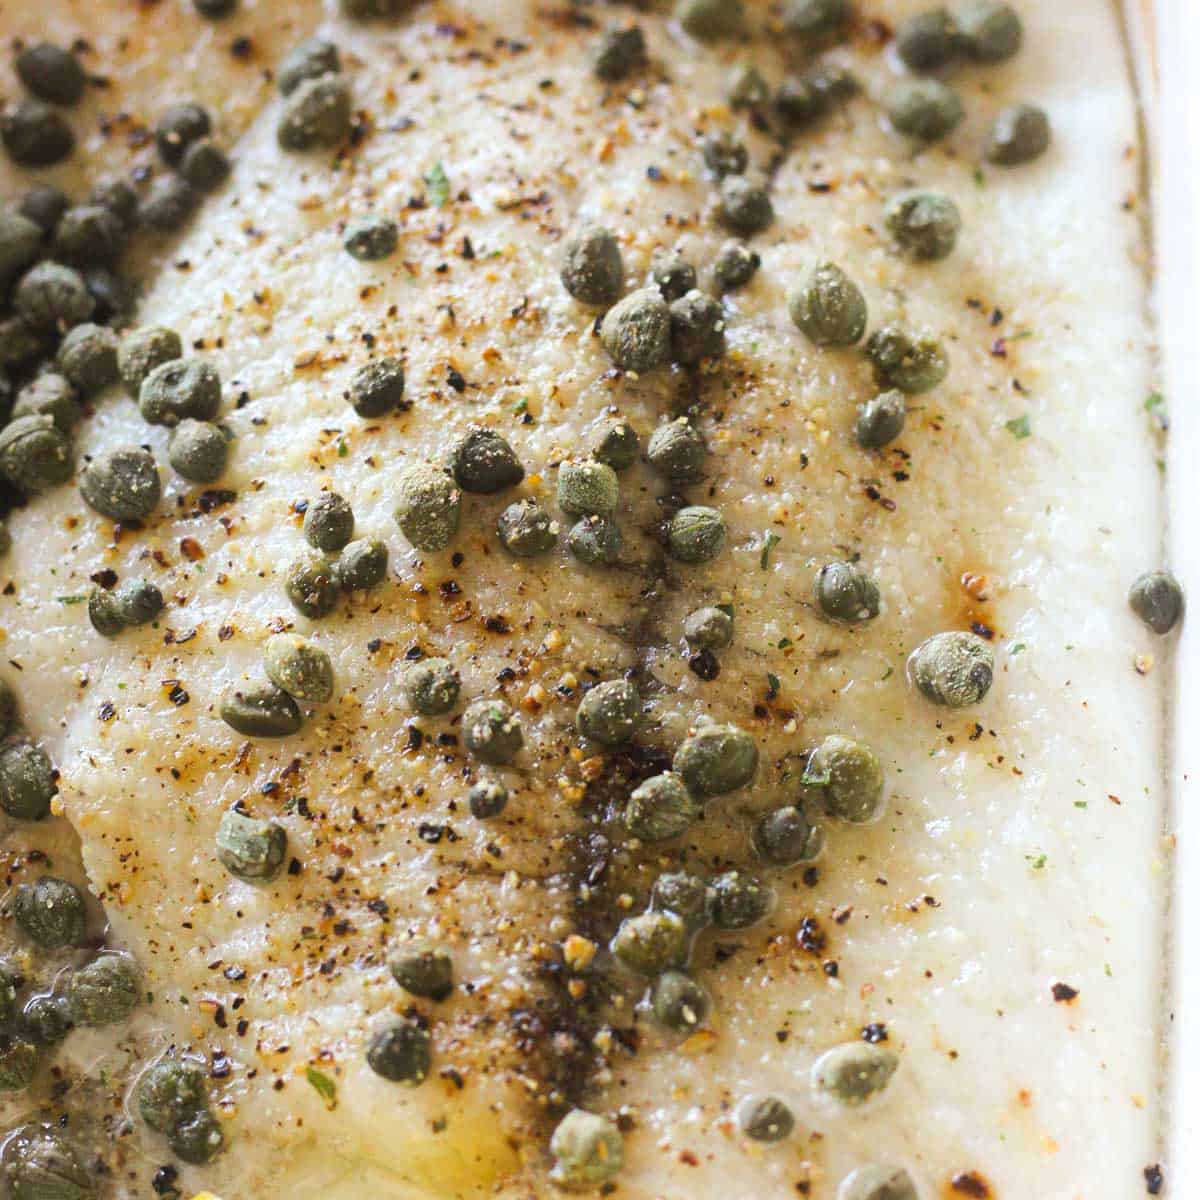 oven cooked plaice with capers on top, black peppers and lemon